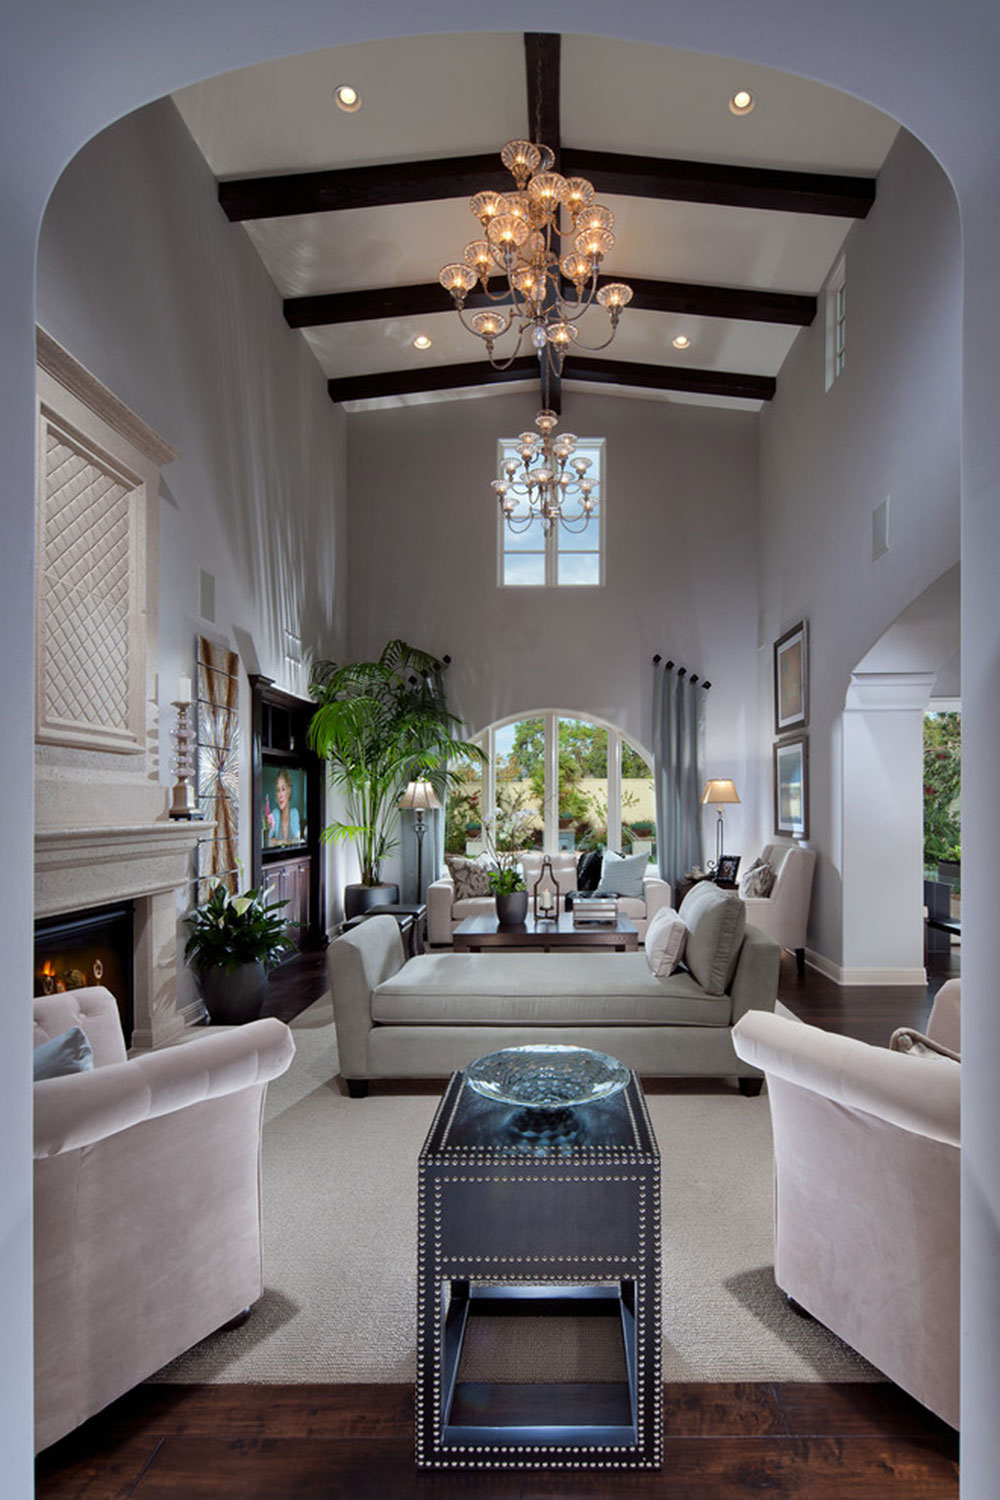 Living-Room-Focal-Points-To-Look-Stylish-And-Elegant1 Living Room Focal Points To Look Stylish And Elegant